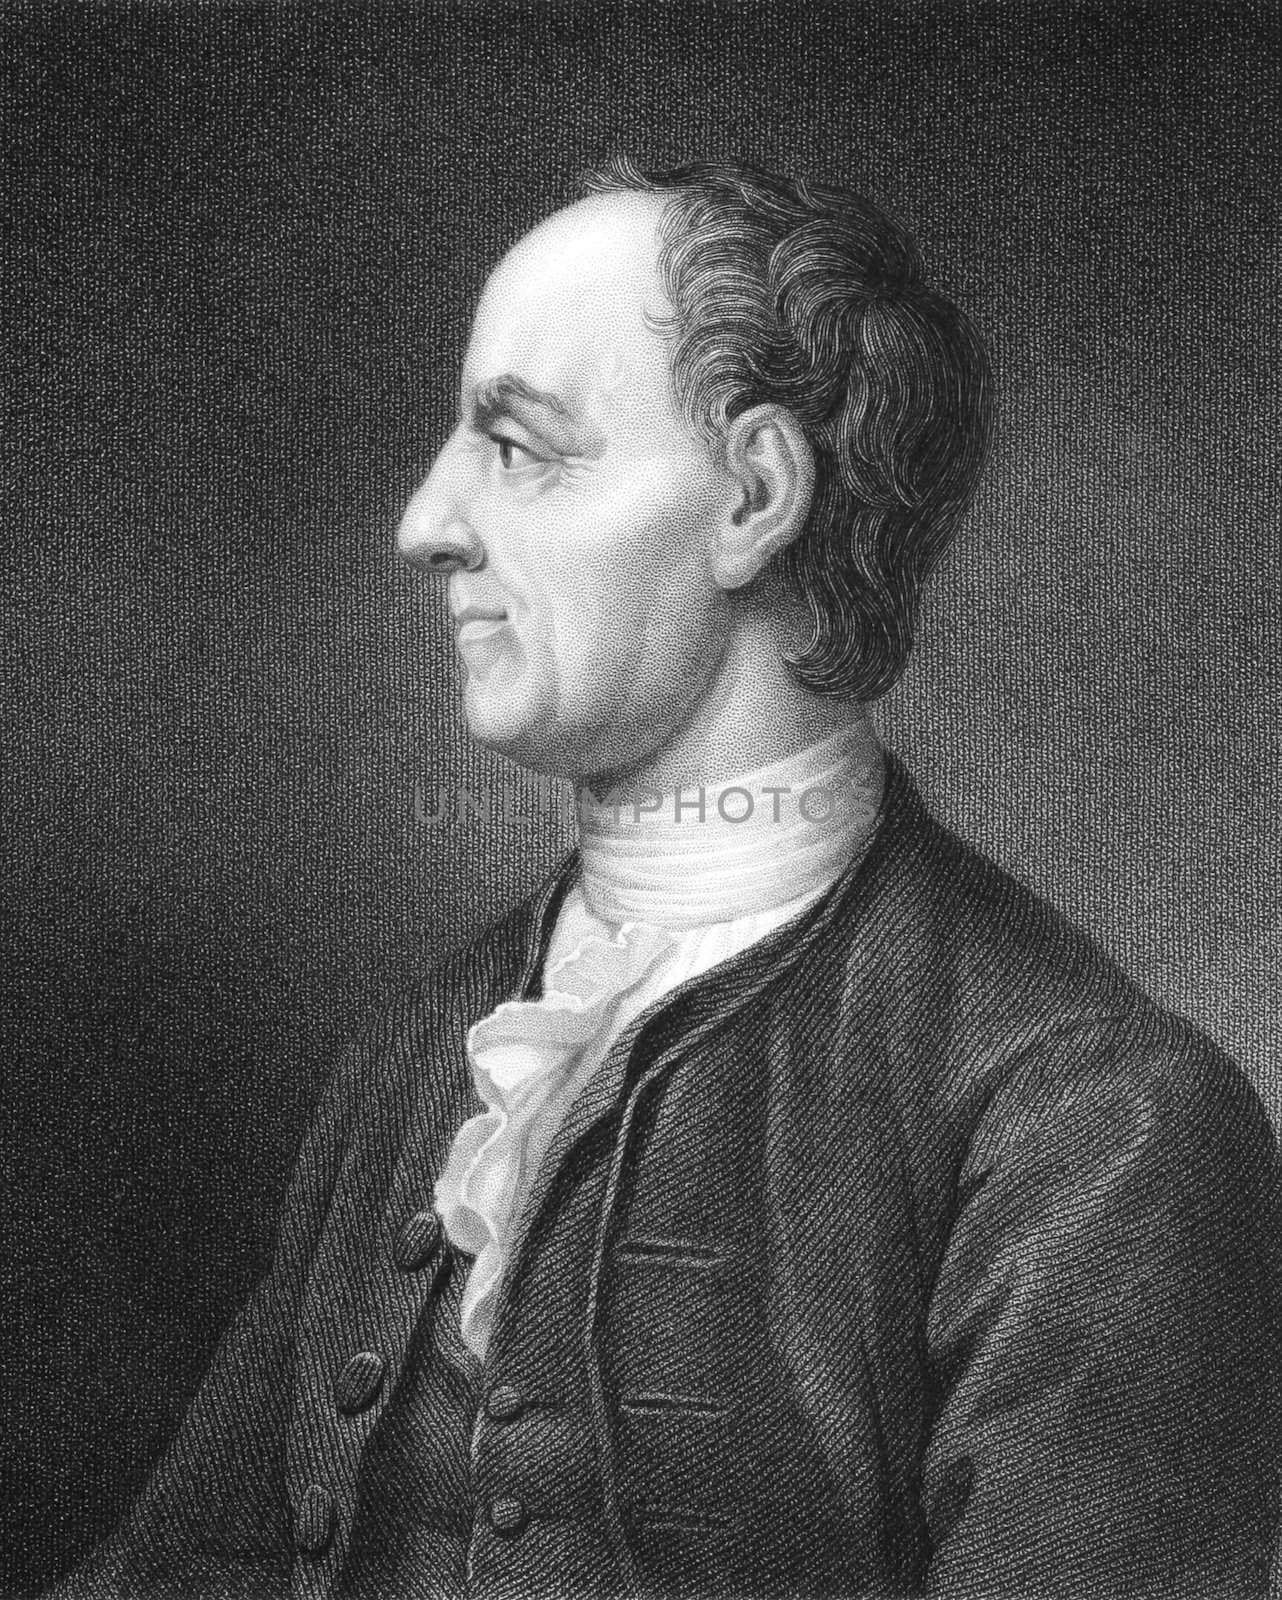 Leonhard Euler (1707-1783) on engraving from the 1800s. Swiss mathematician and physicist
Engraved by B.Holl from a picture by Lorgna and published in London by Charles Knight, Ludgate Street.